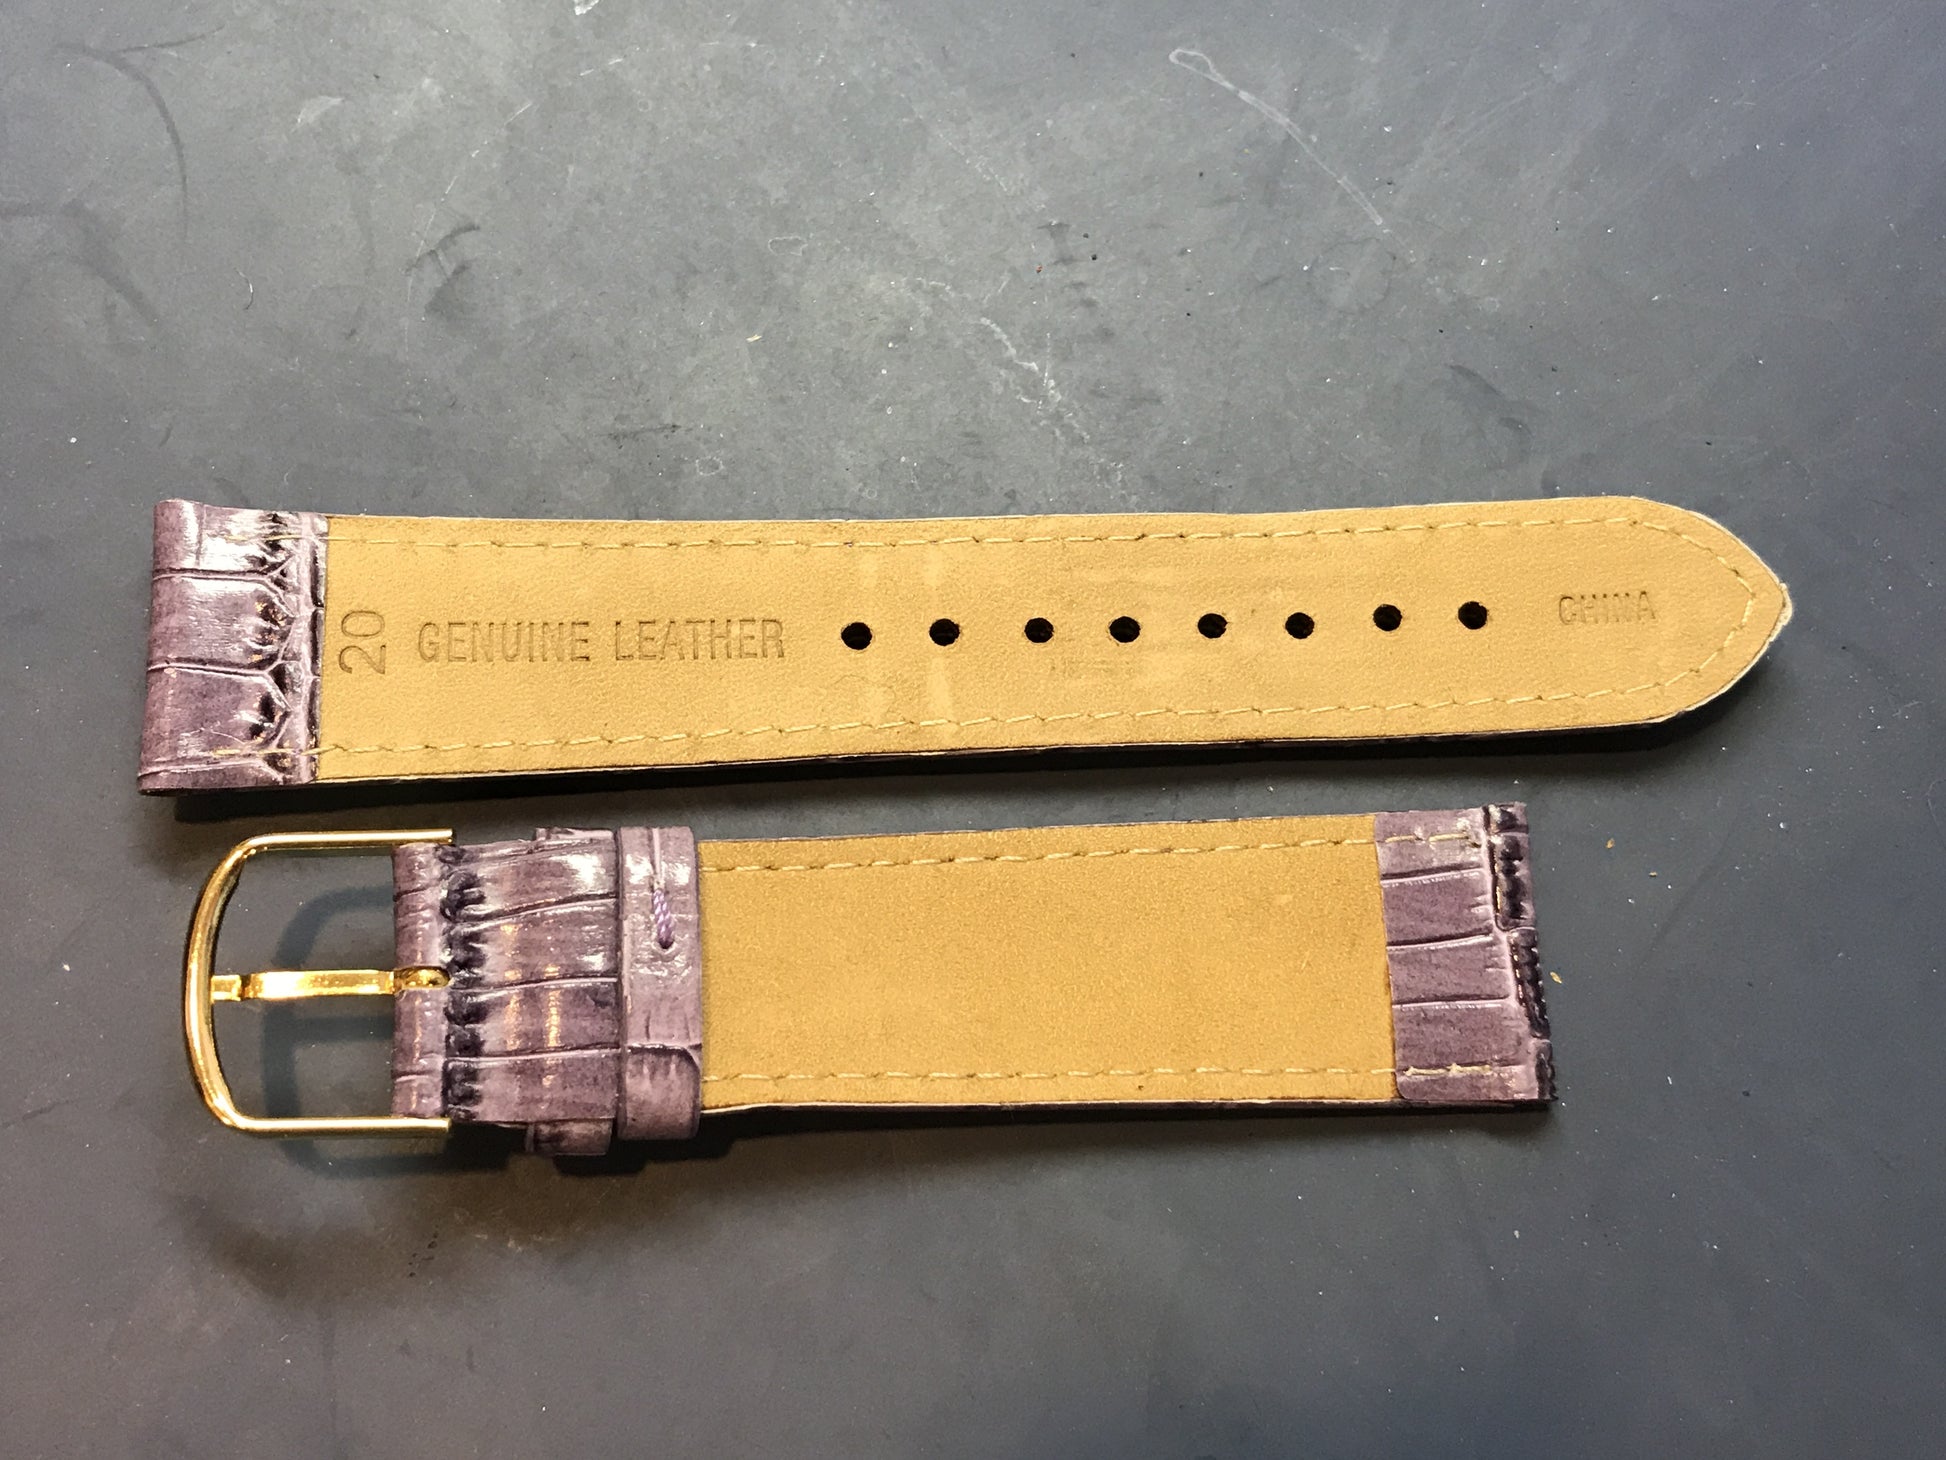 20mm PURPLE Color Genuine Leather Watch Strap - New